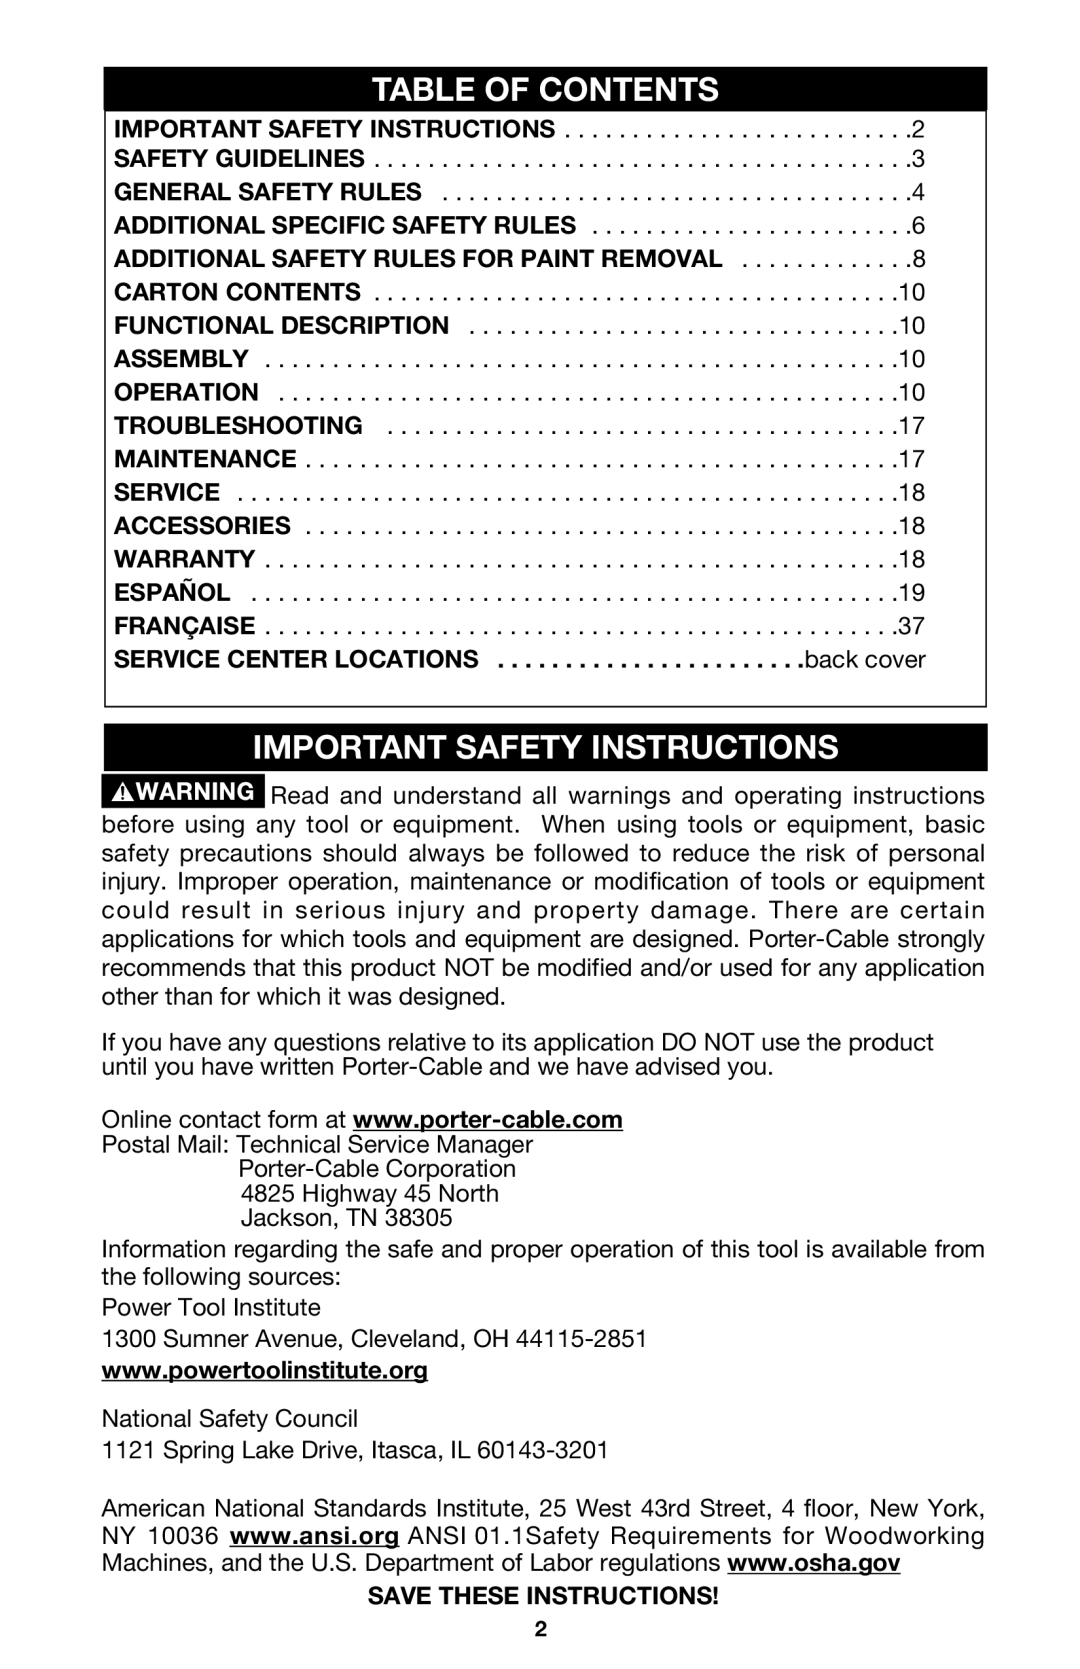 Porter-Cable 444vs instruction manual Table Of Contents, Important Safety Instructions 